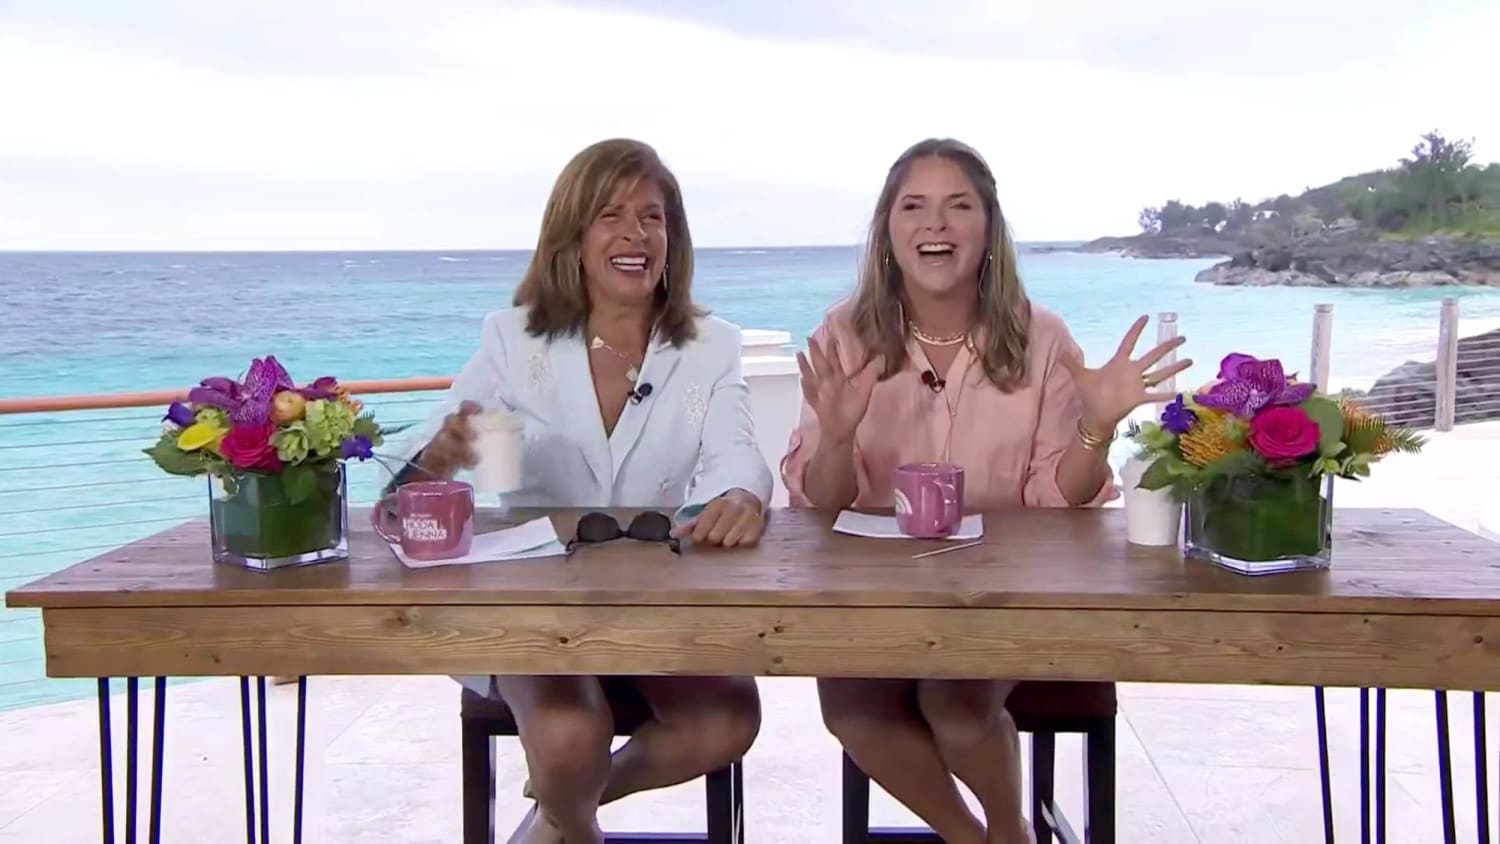 Hoda and Jenna debate breakfast in bed on Mother's Day: 'Y'all don't want crumby sheets!'